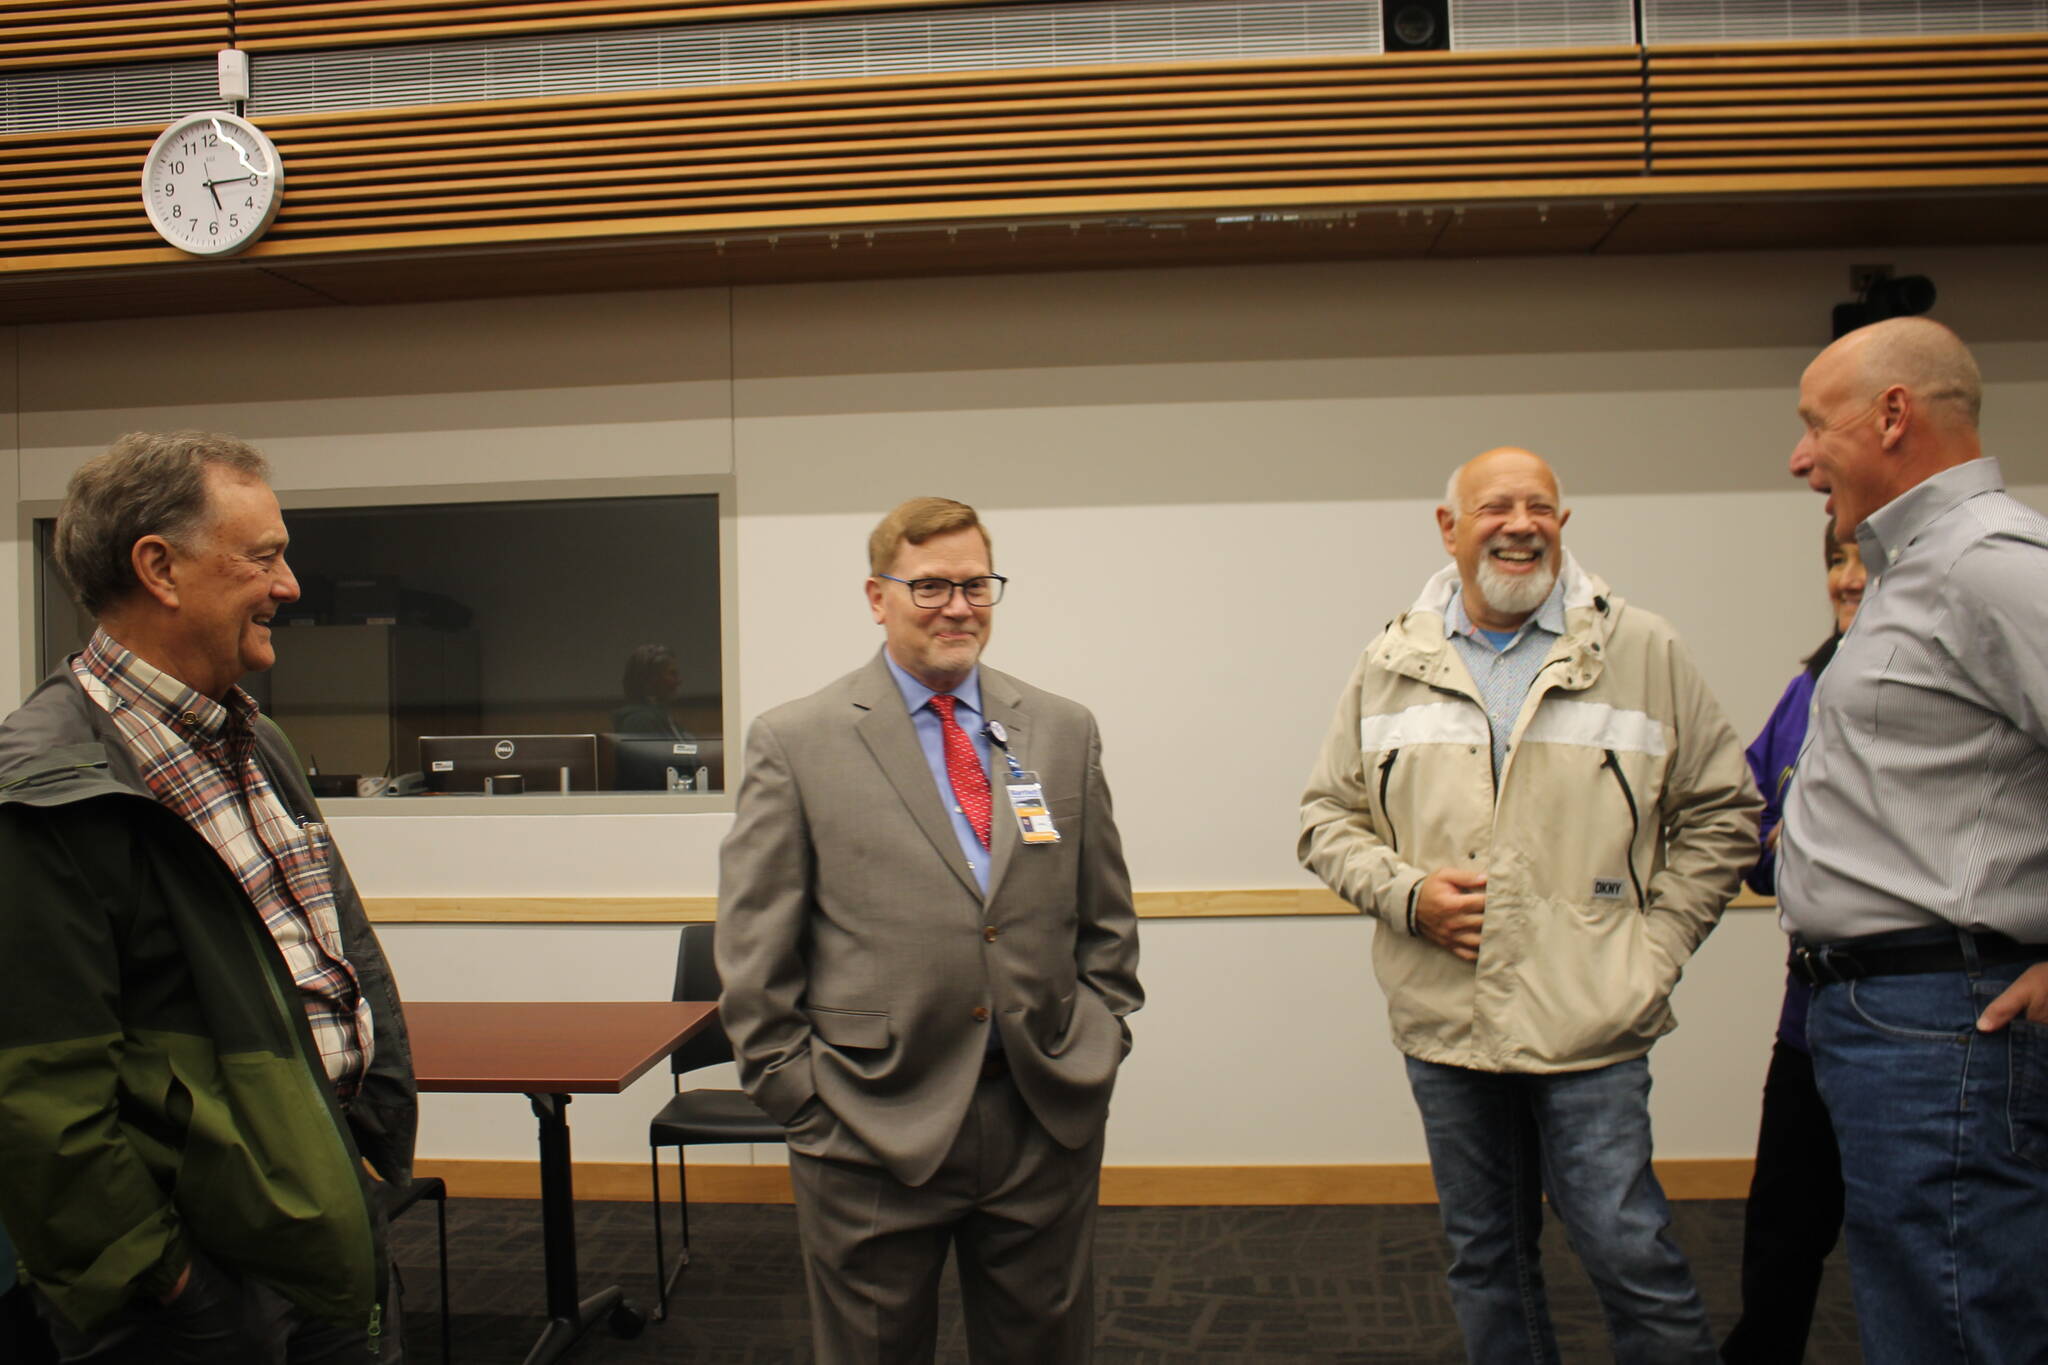 Bartlett Regional Hospital’s CEO finalist Jeffery Hudson-Covolo (left-center) chats with community members and members of the BRH Board of Directors at his public meet and greet for the potential position. (Clarise Larson / Juneau Empire)